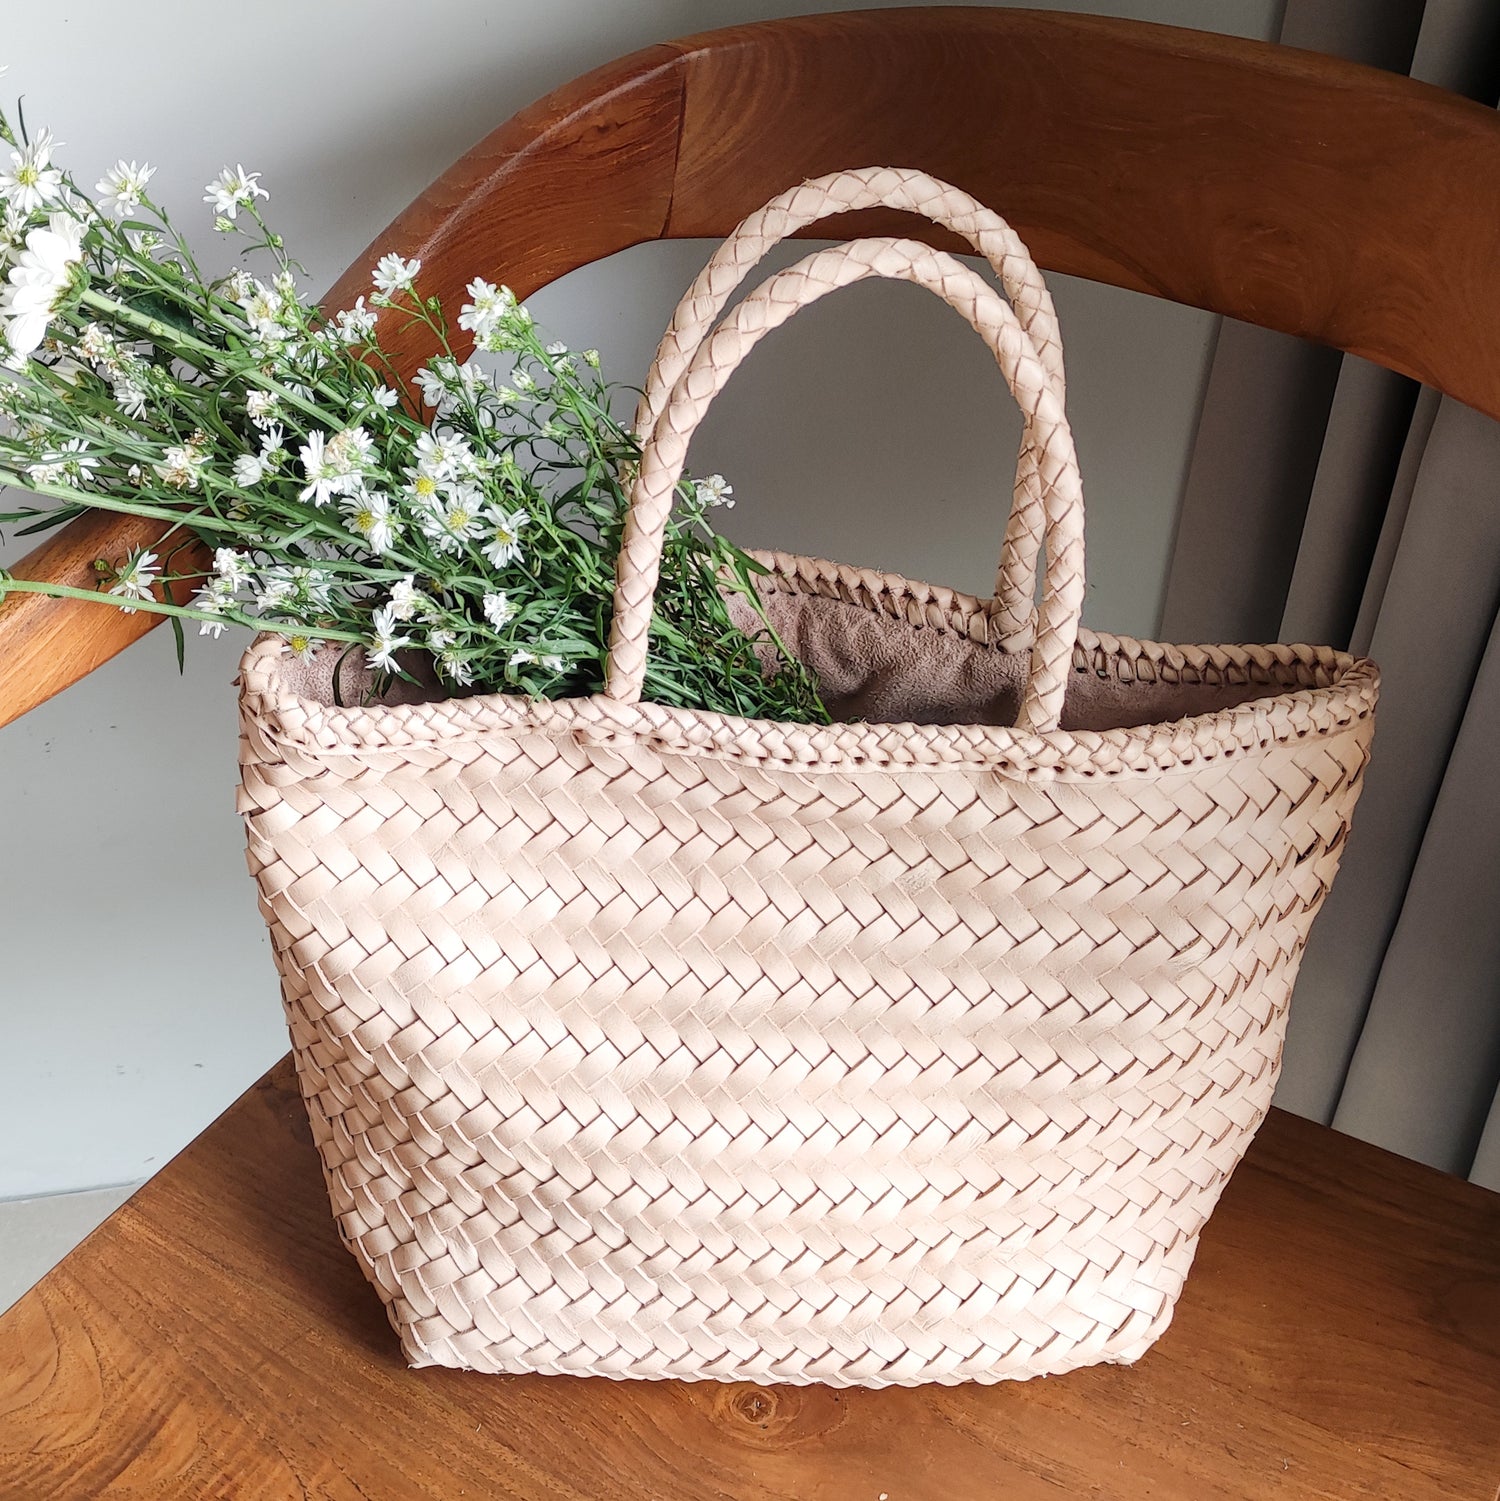 A woven bag placed on a wooden chair is the Cening Woven Bag from Seminyak Leather Bali. This natural blush colored bag is made of vegtanned leather which is shaped using a woven method to form a strong and beautiful bag.